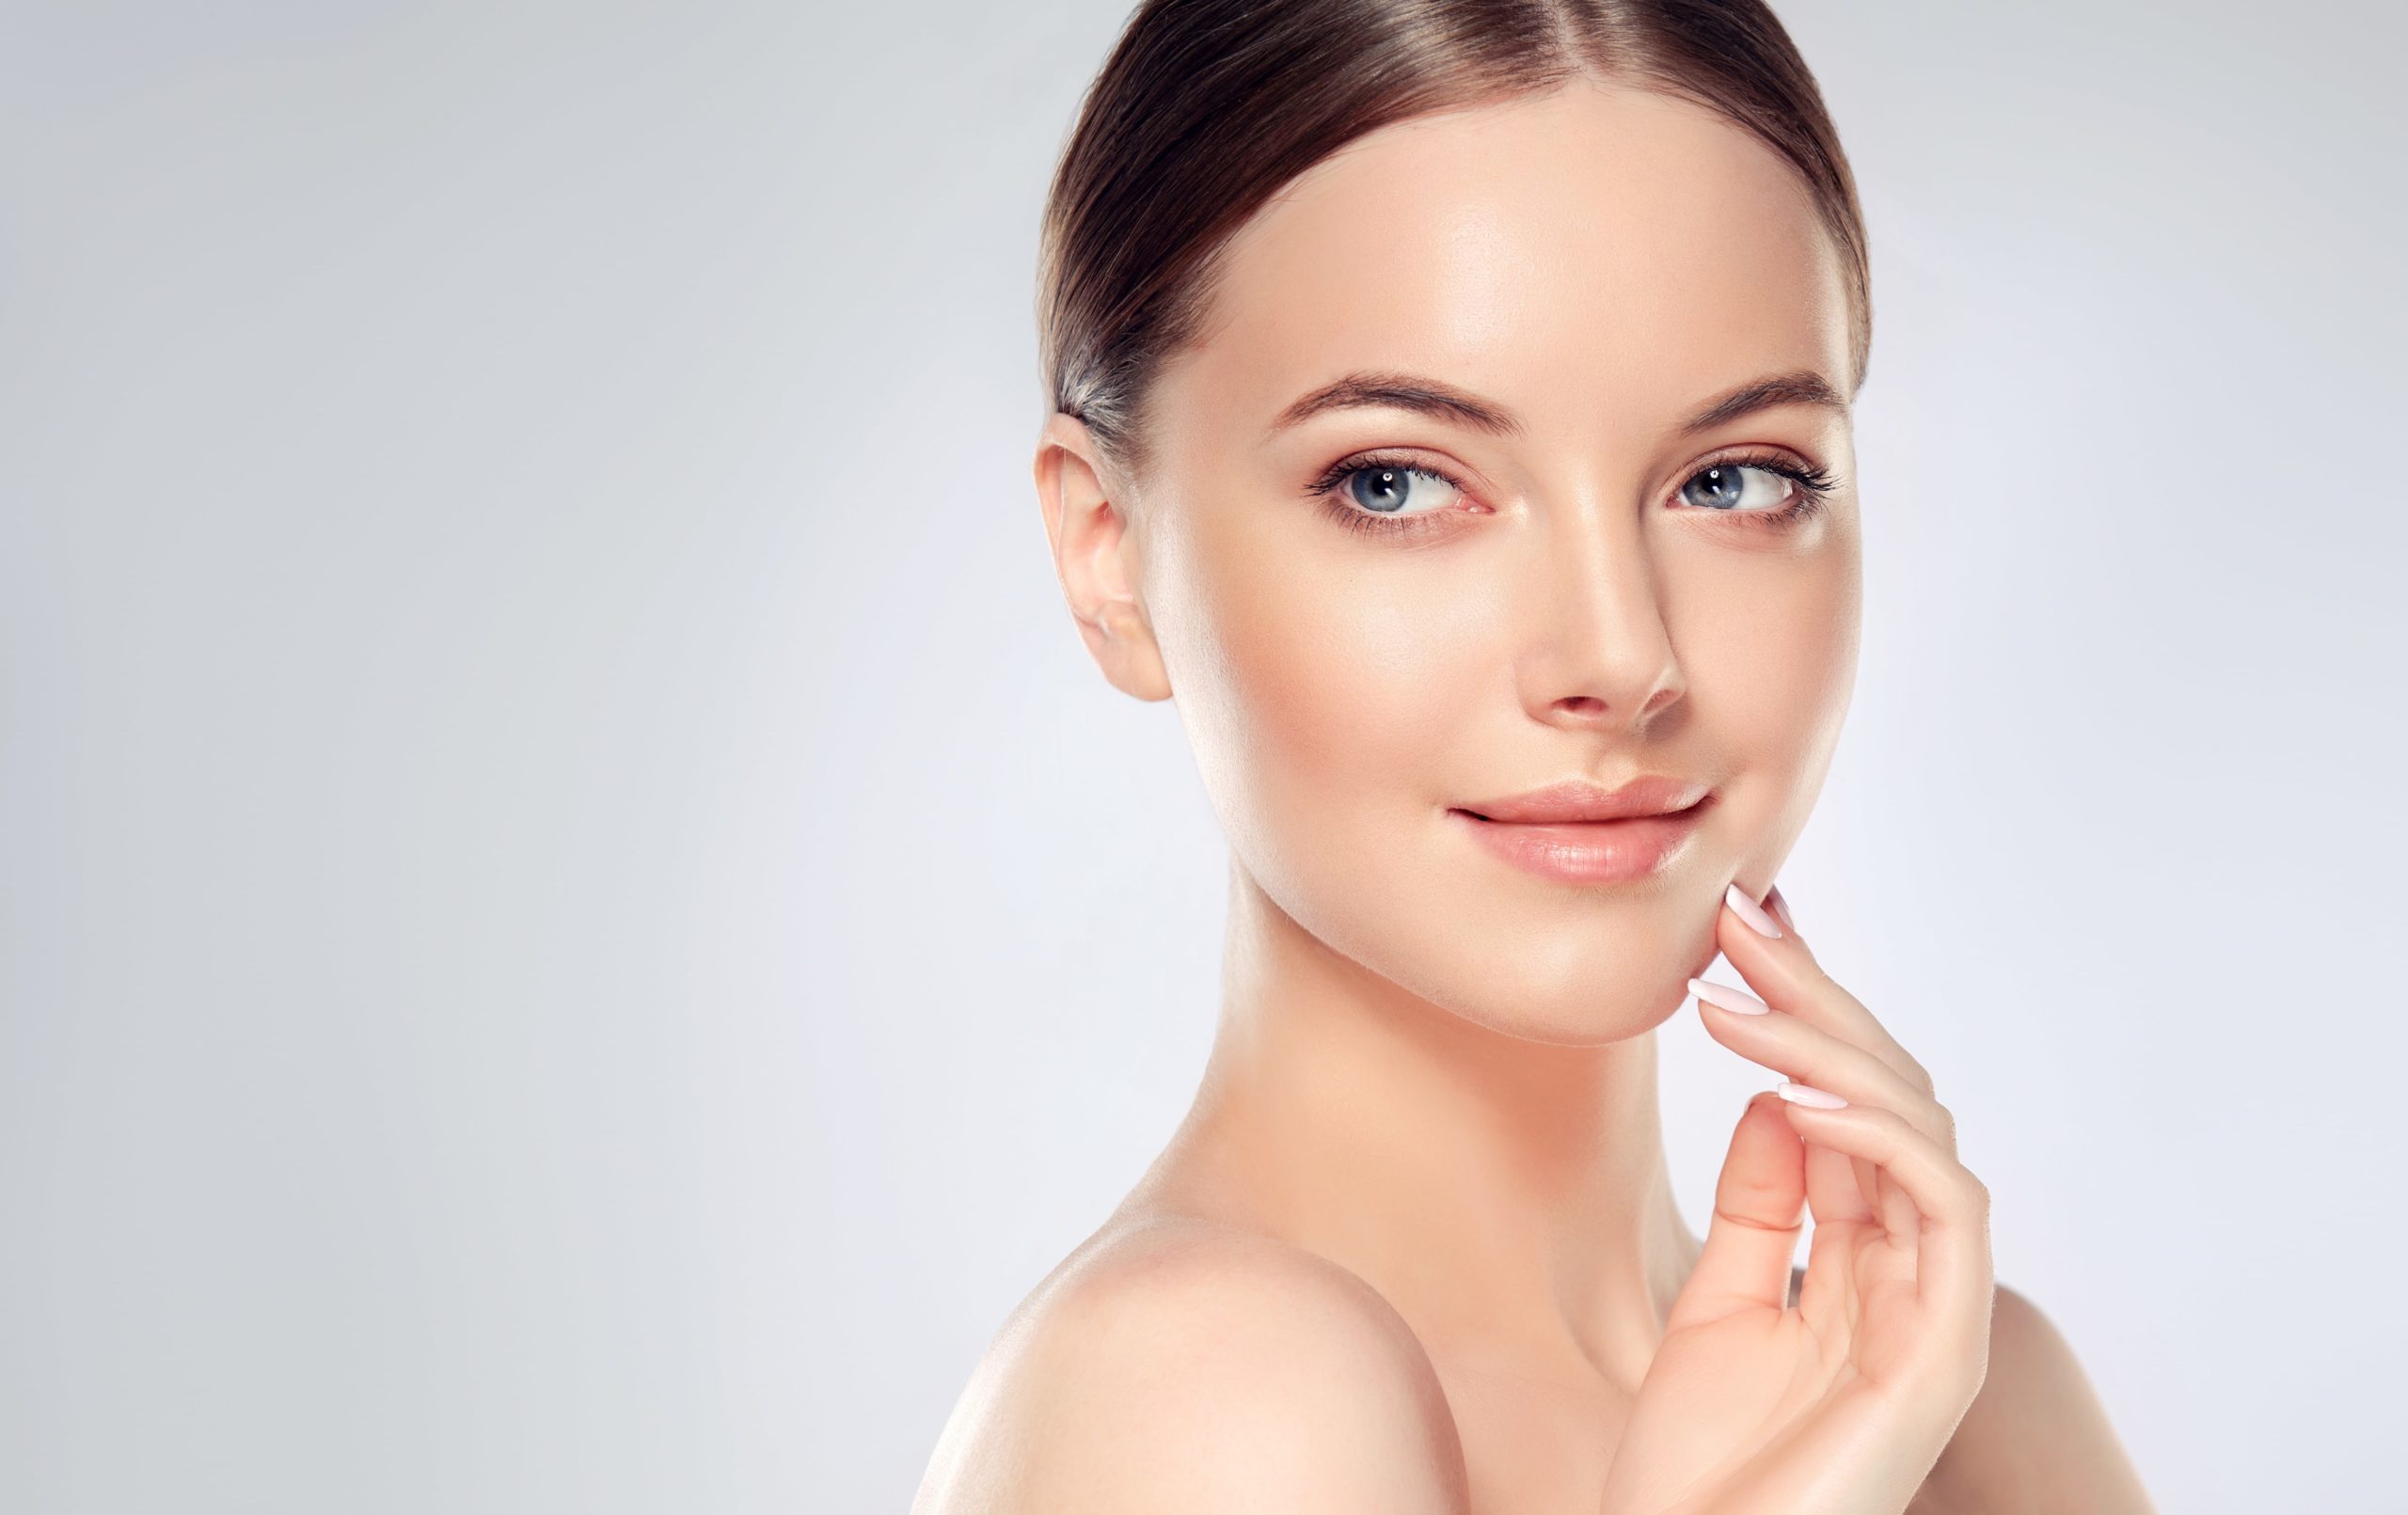 What Is The Difference Between Dermal Fillers And Botox